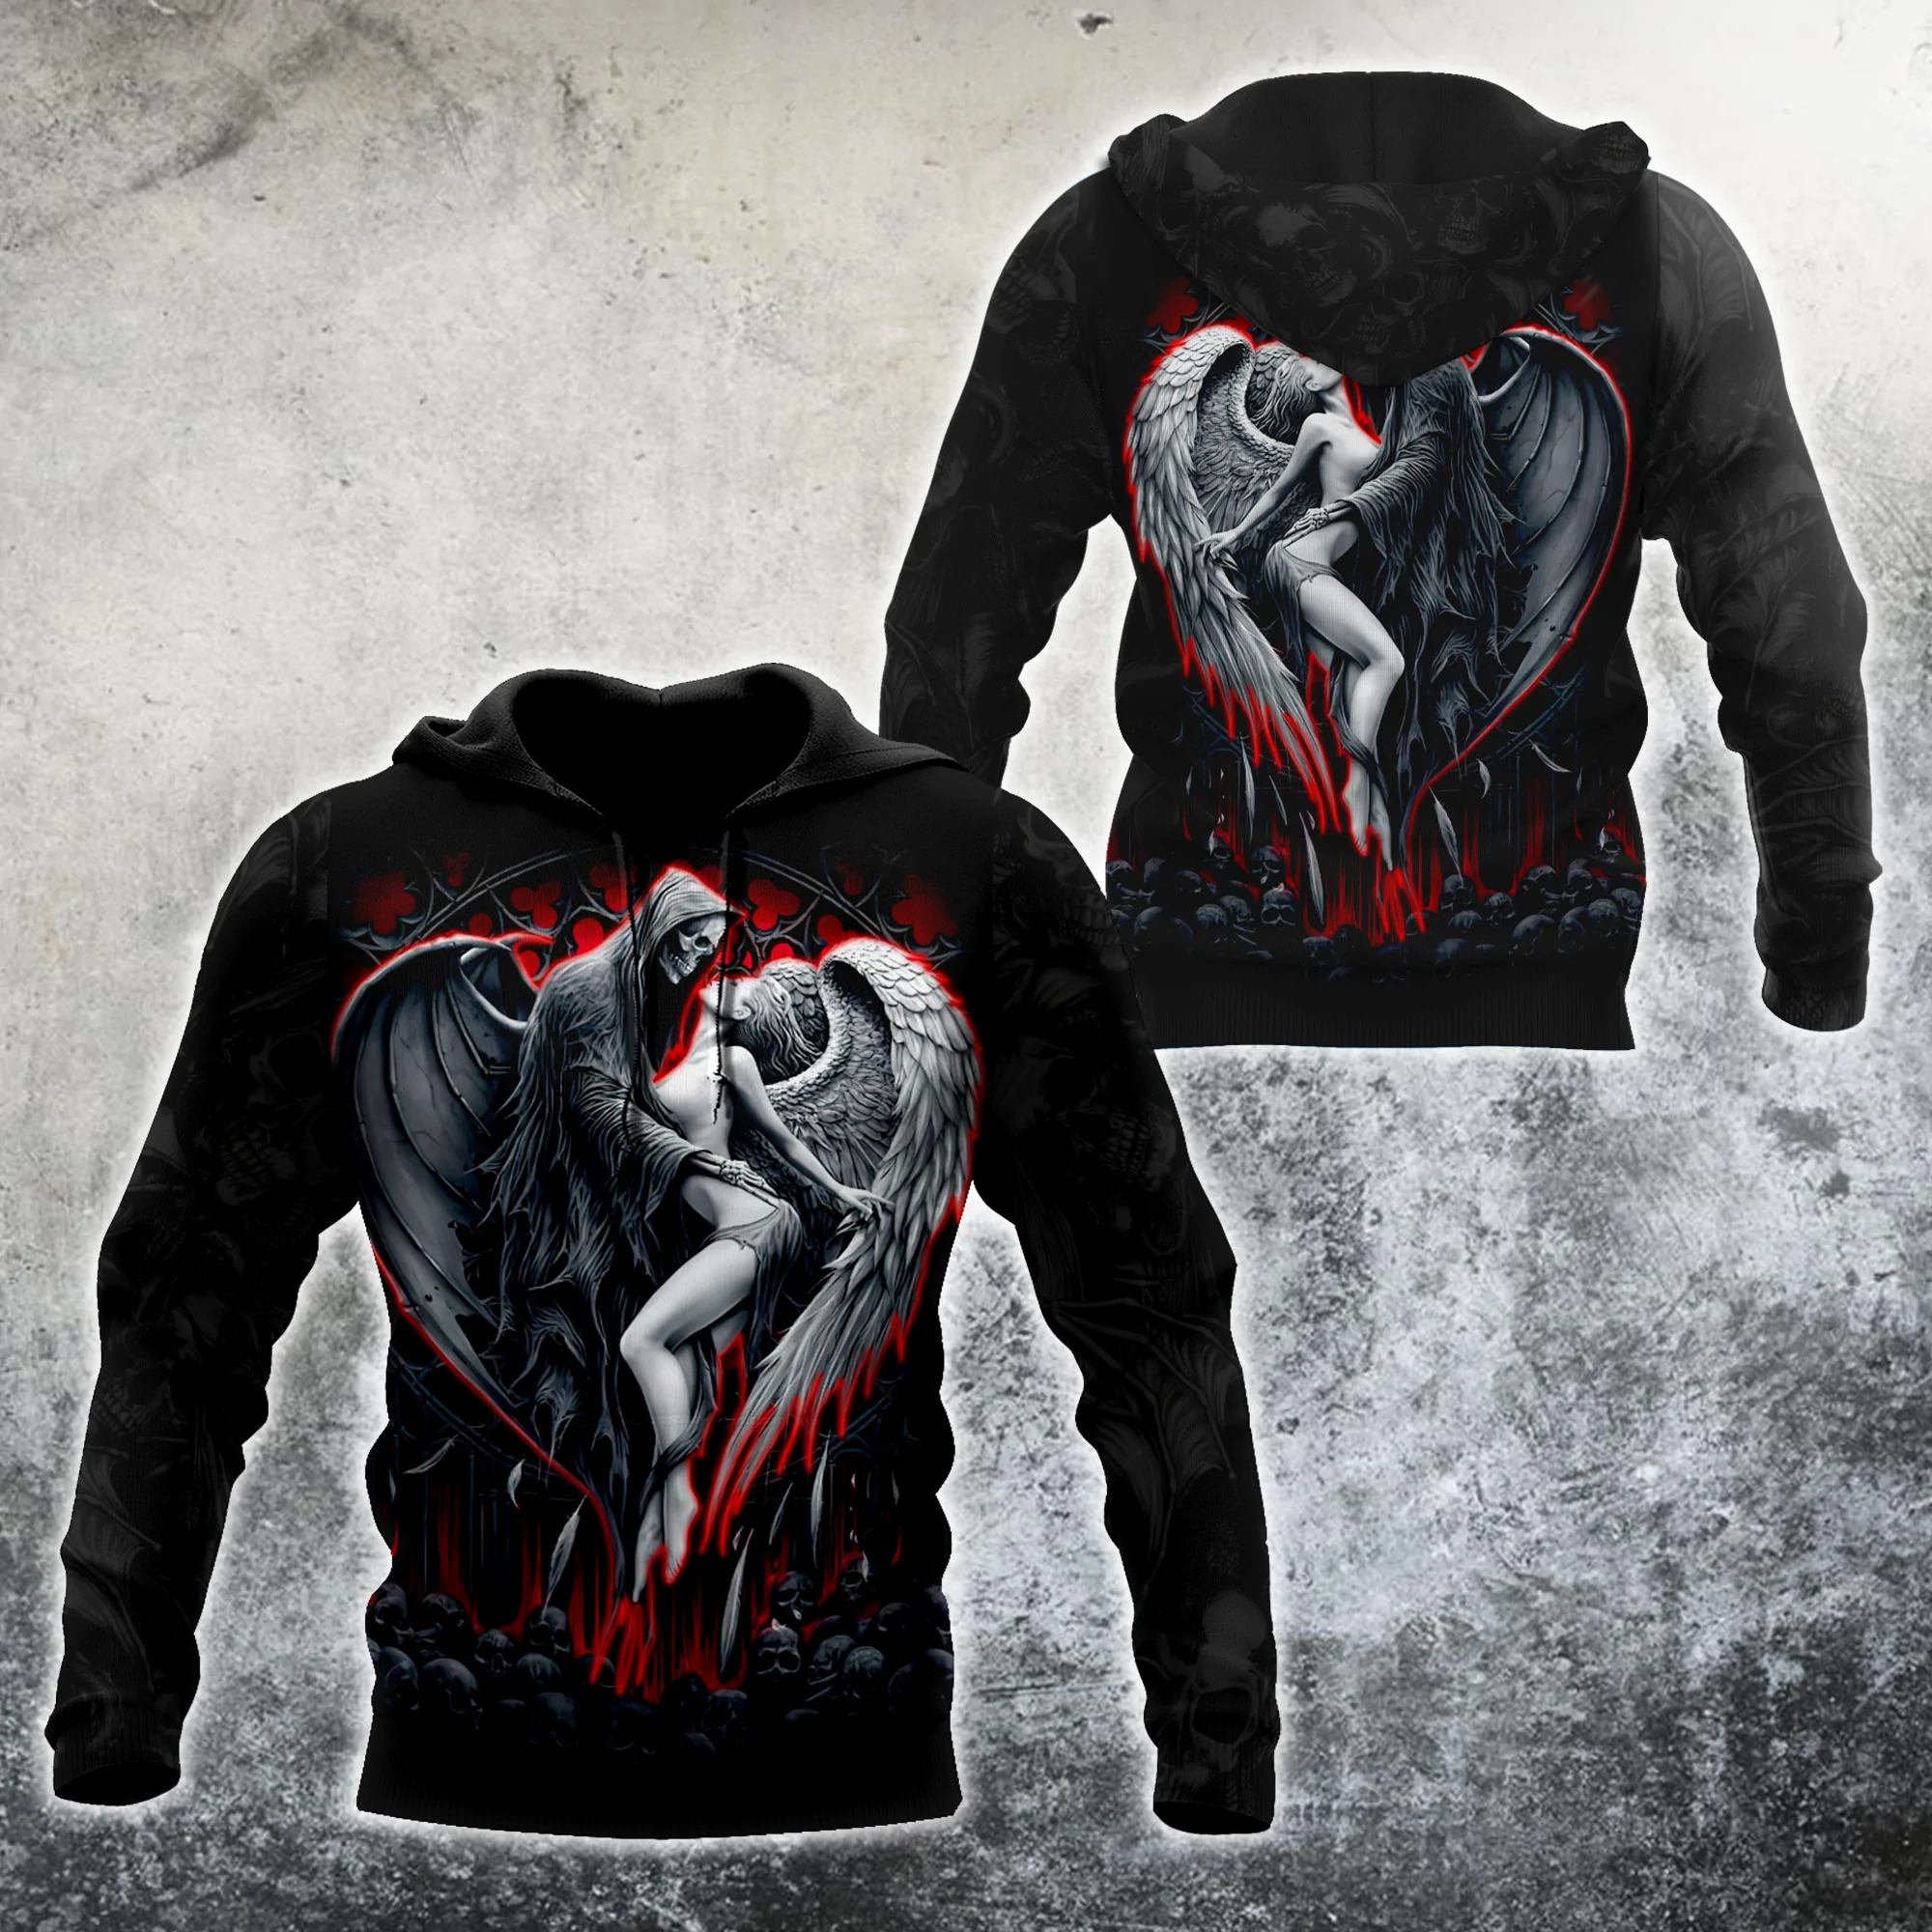 Skull And Beauty 3D All Over Printed Hoodie For Men And Women